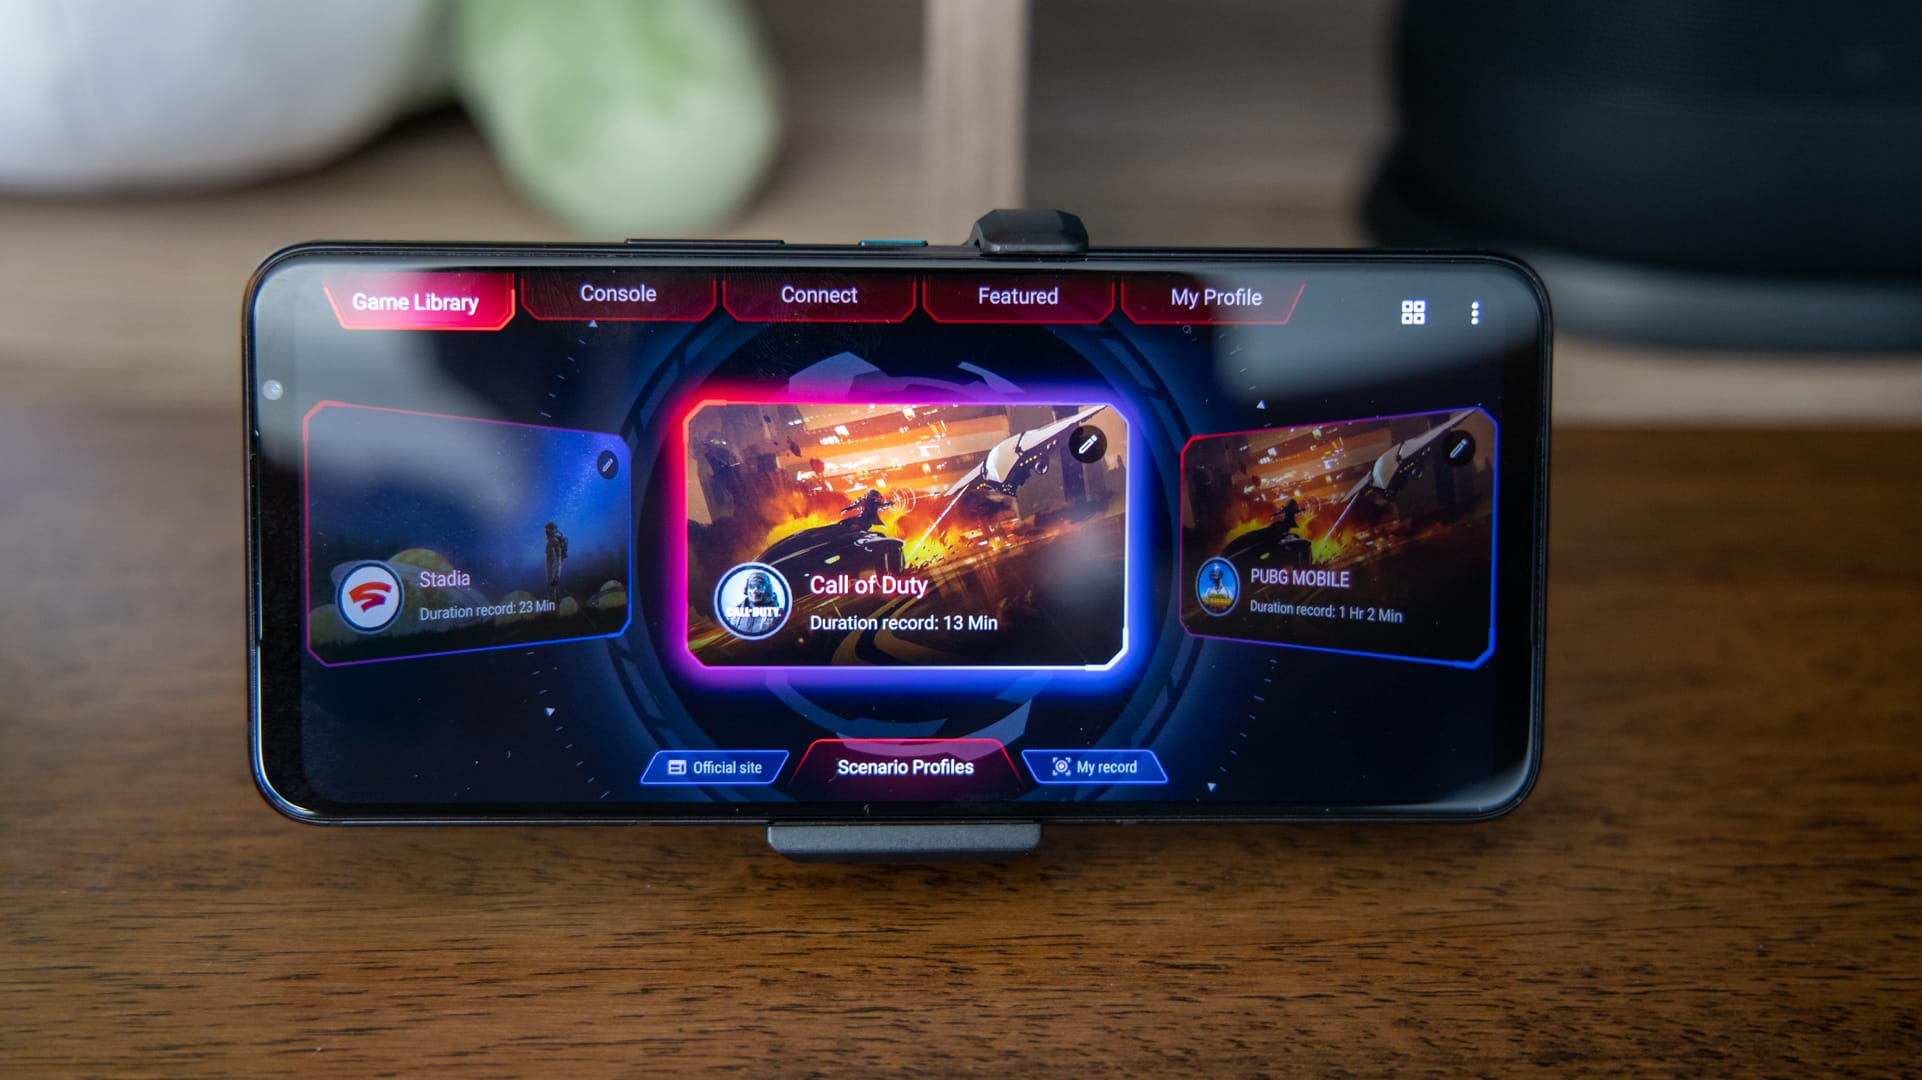 Asus ROG Phone 5 Ultimate Edition 14 Lenovo legion Duel 2 vs Asus Rog Phone 5 Ultimate: Which is a better Gaming device?